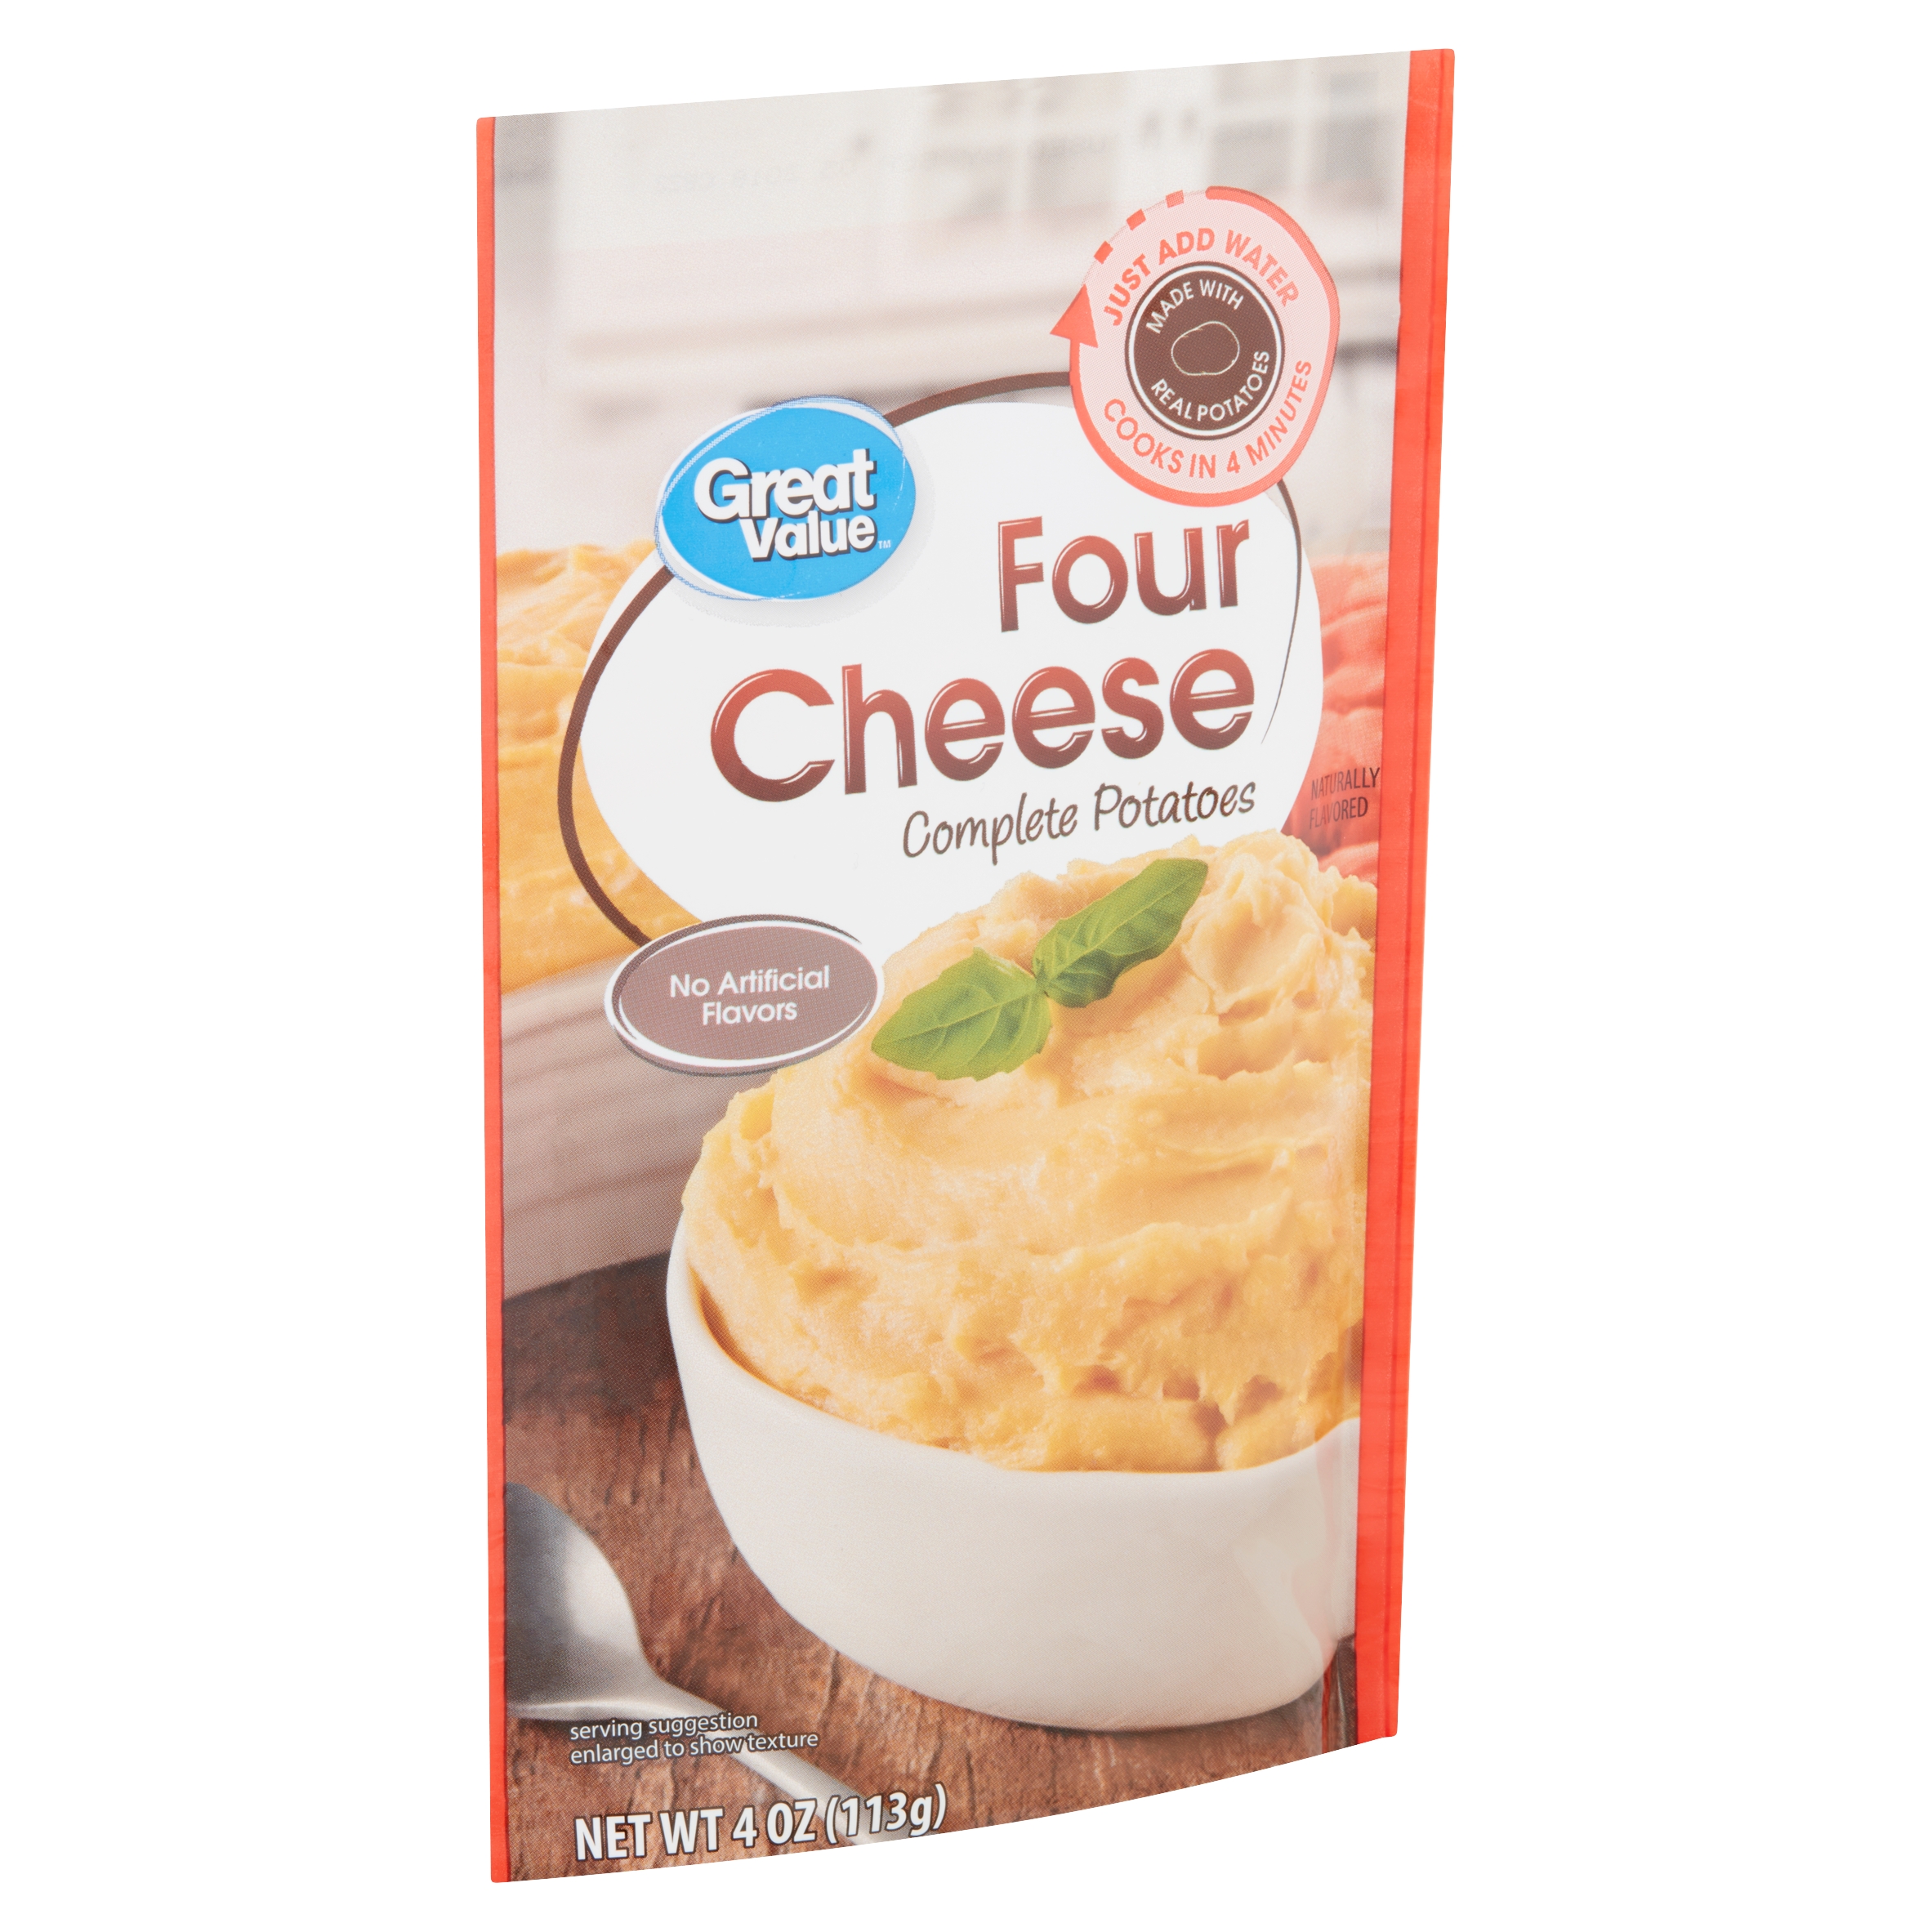 Great Value Four Cheese Complete Potatoes 4 Oz